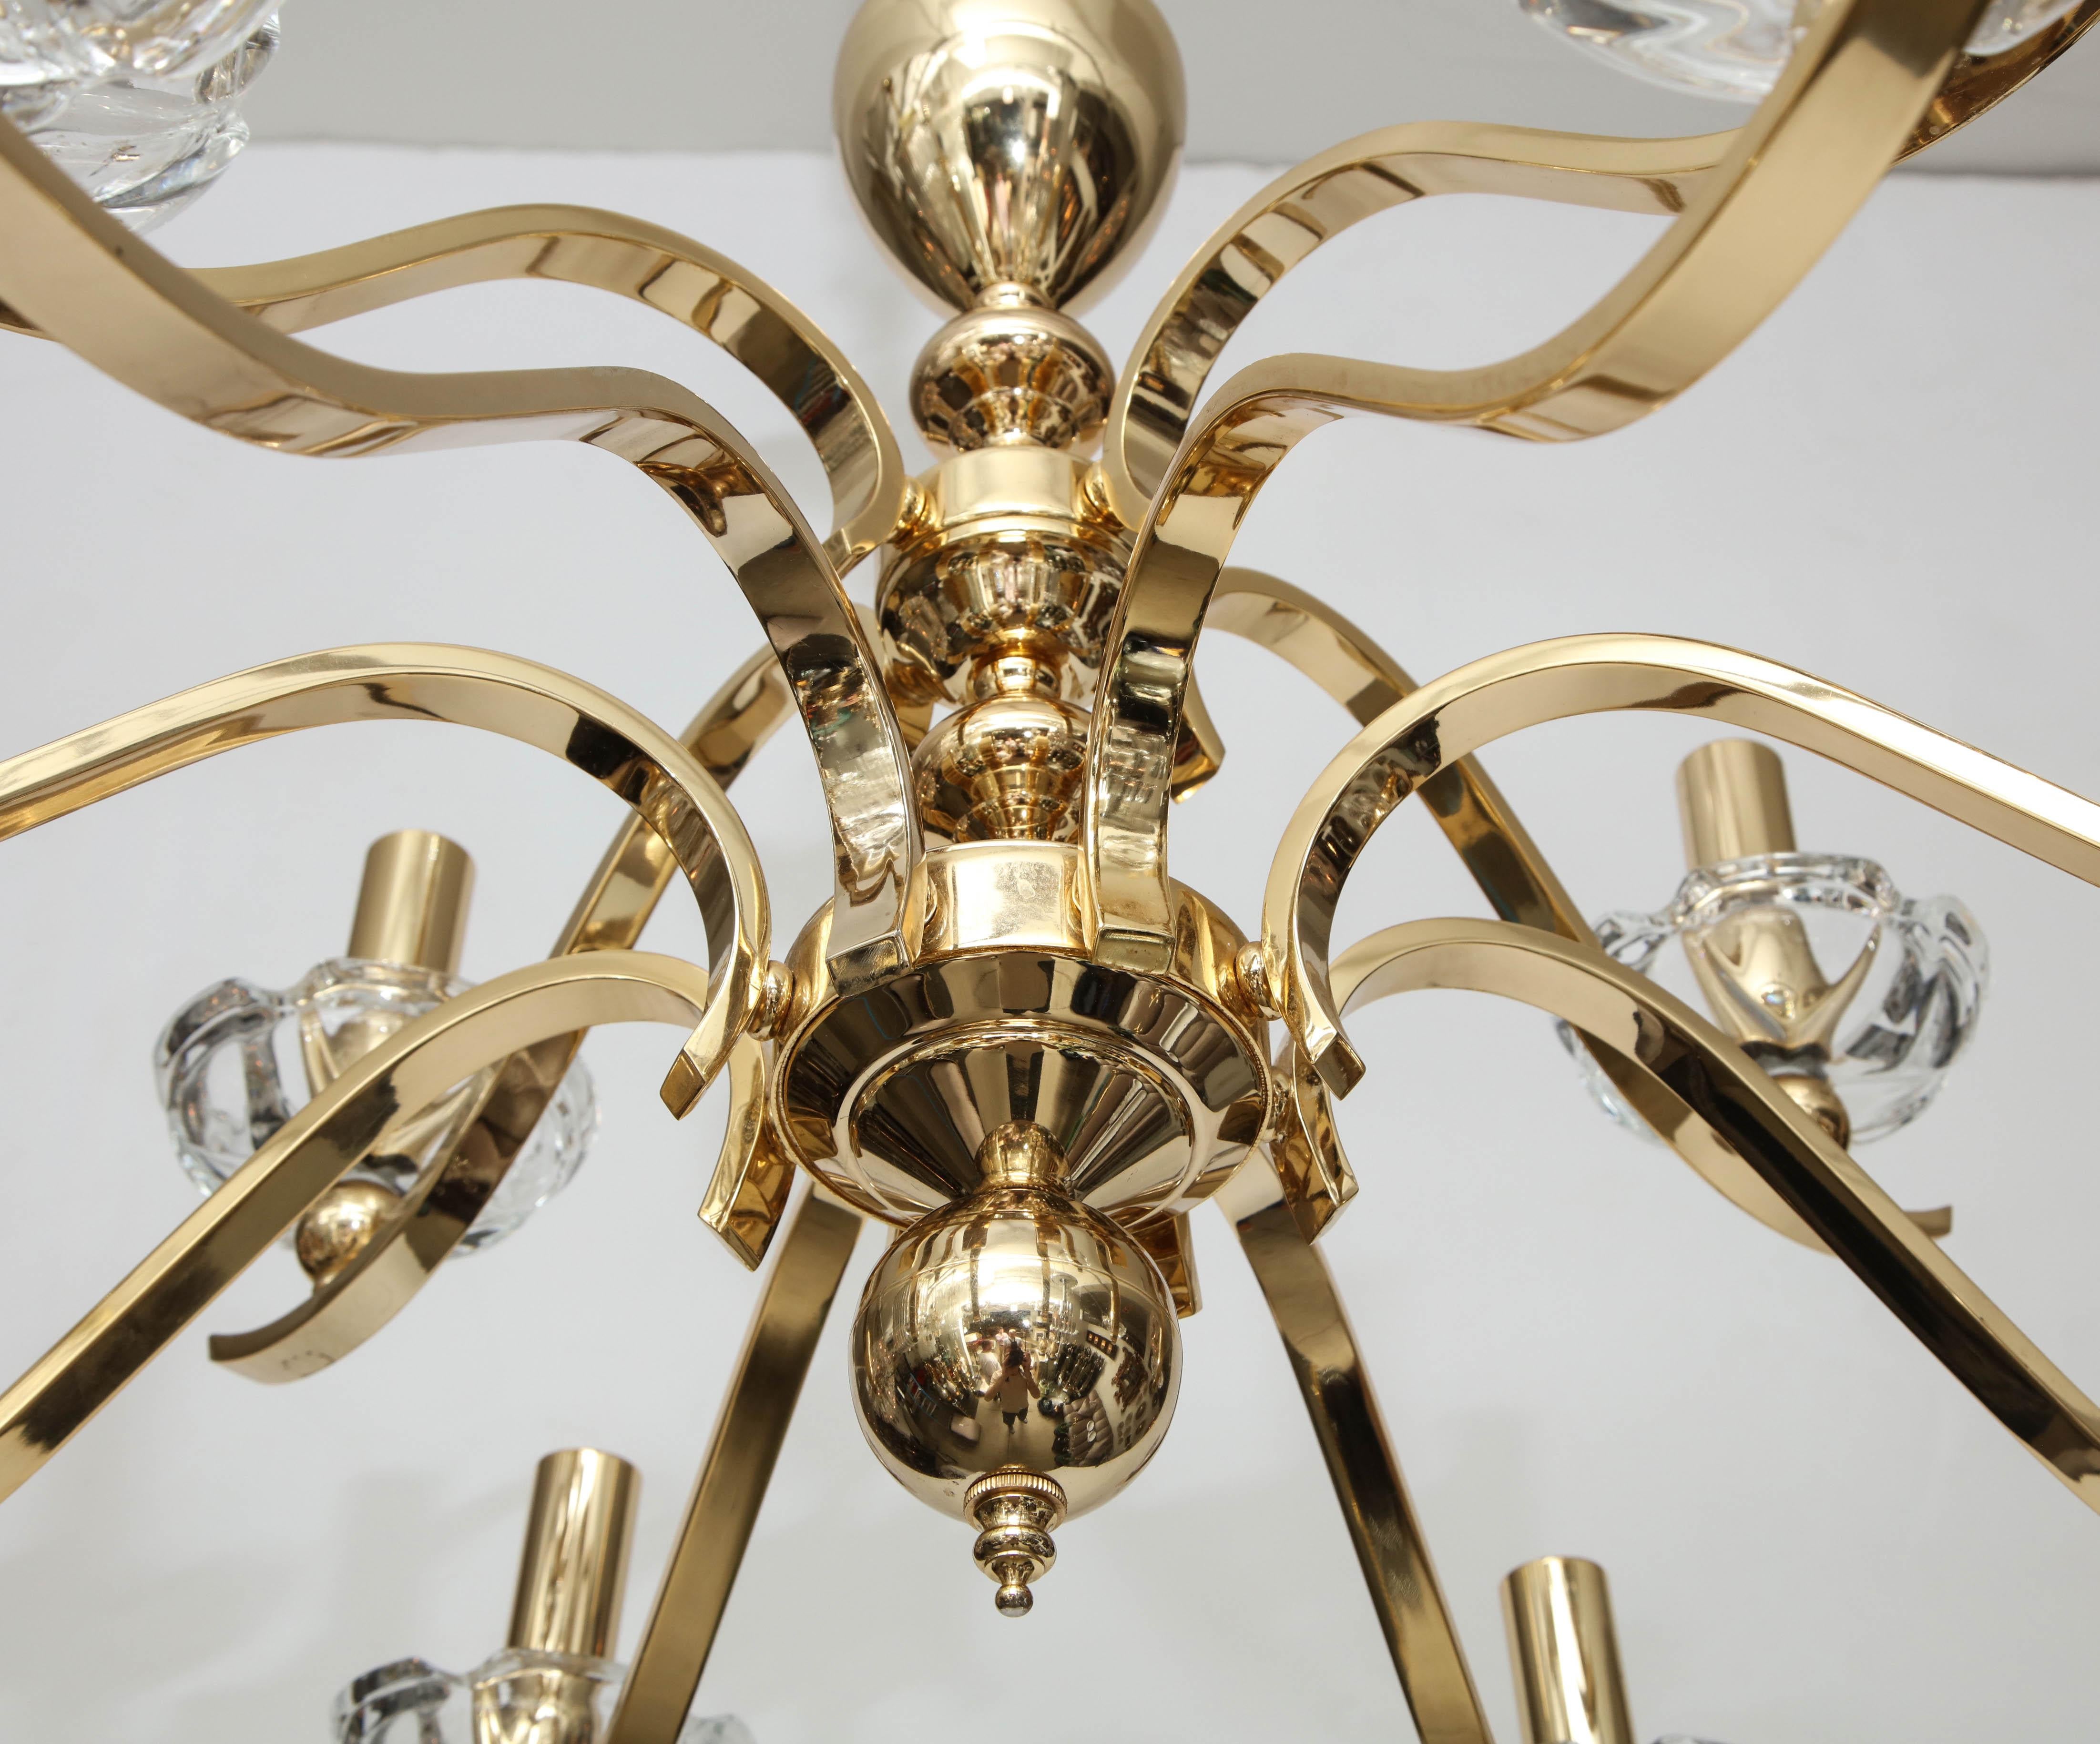 Large brass chandelier with twelve crystal bobeches.
The chandelier has been Newly rewired for the US and takes 
candelabra light bulbs.
It comes complete with chain and ceiling canopy.